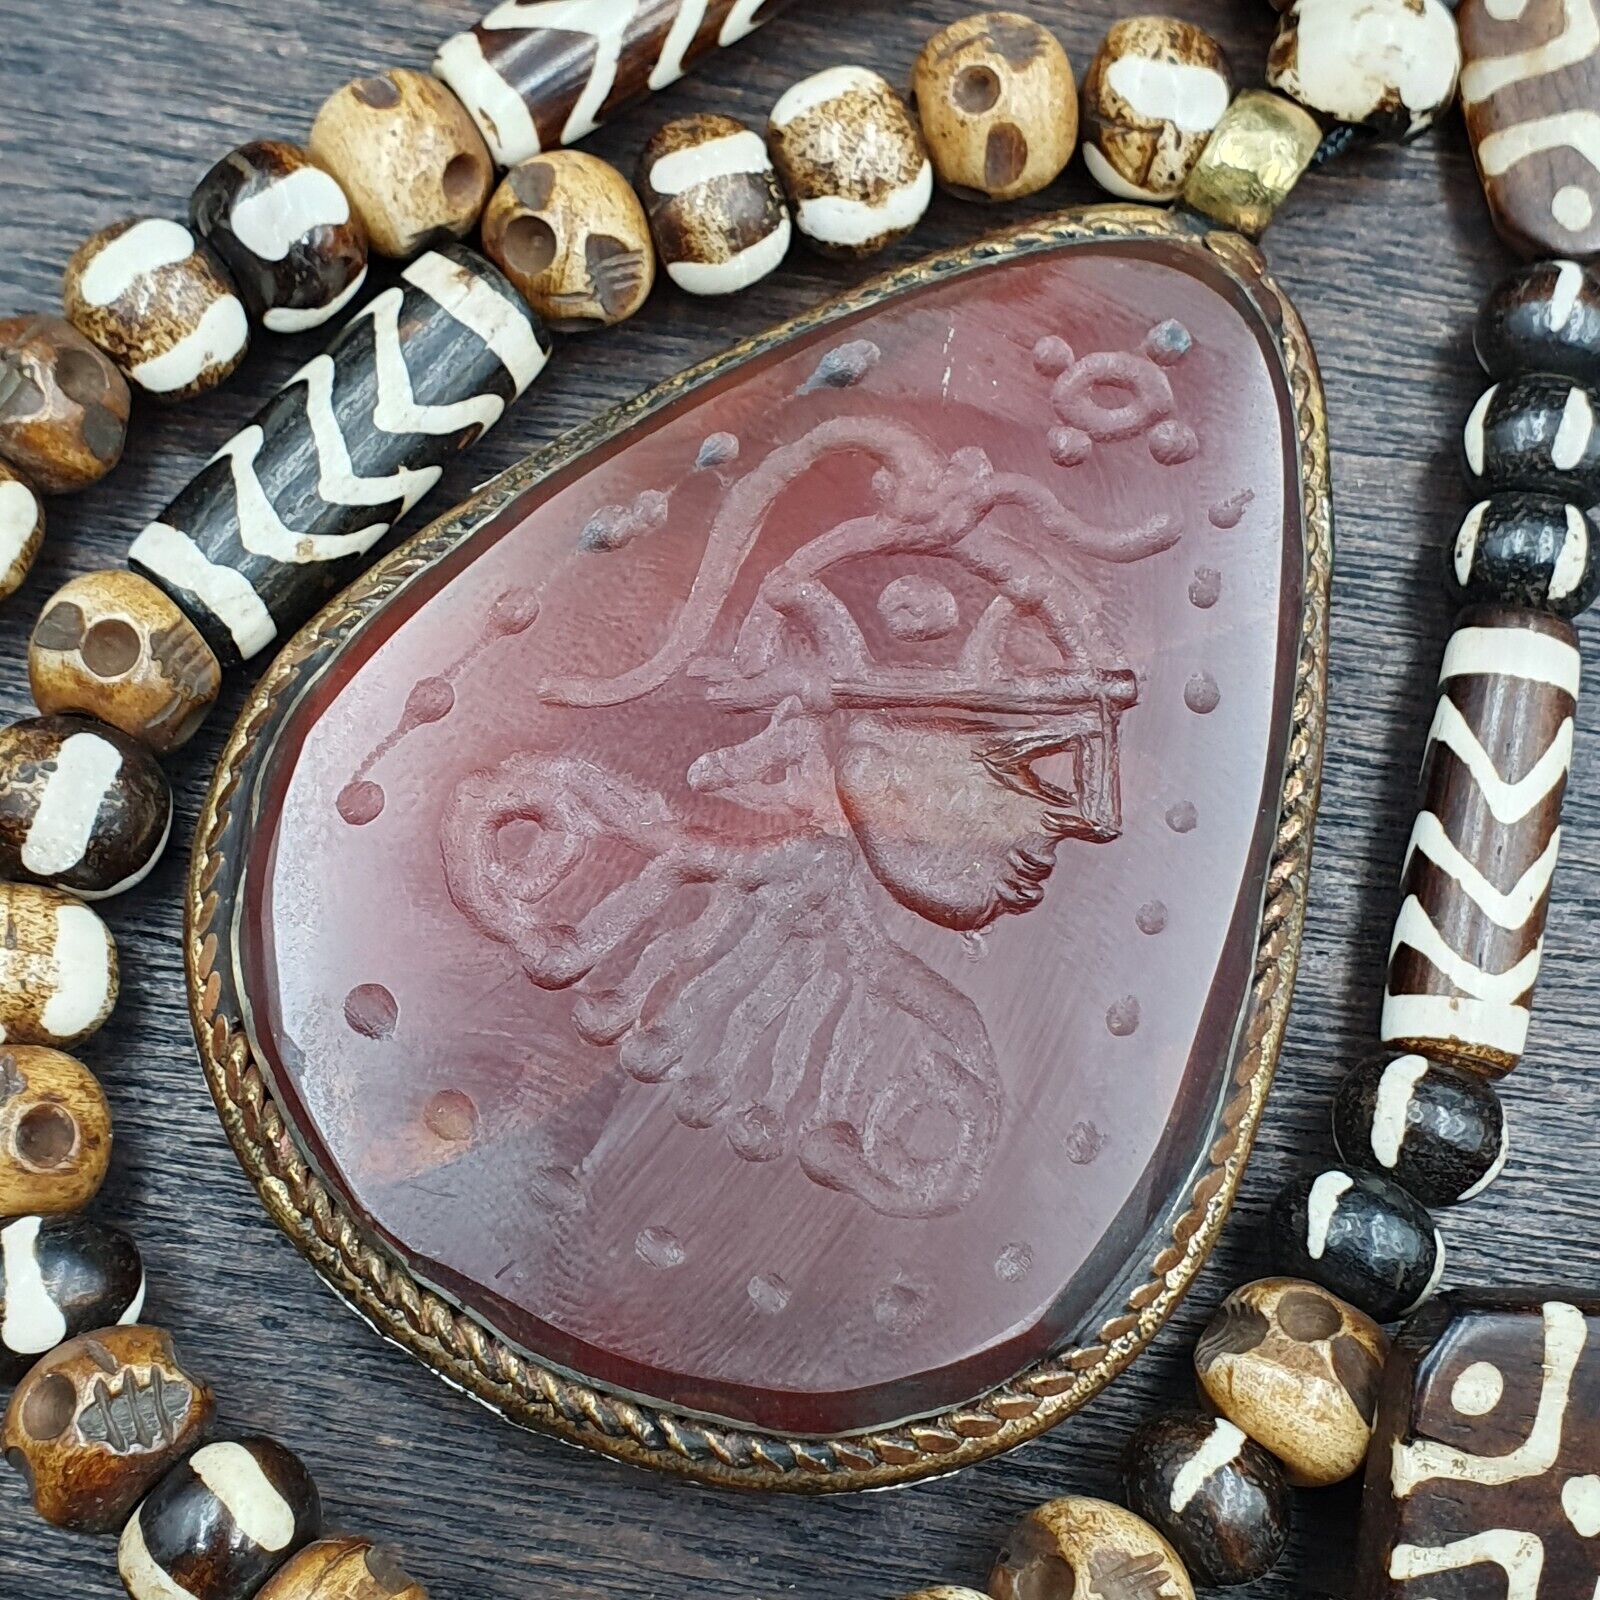 Antique Wonderful Carving Agate pendent Carved King Rare Pendant necklace